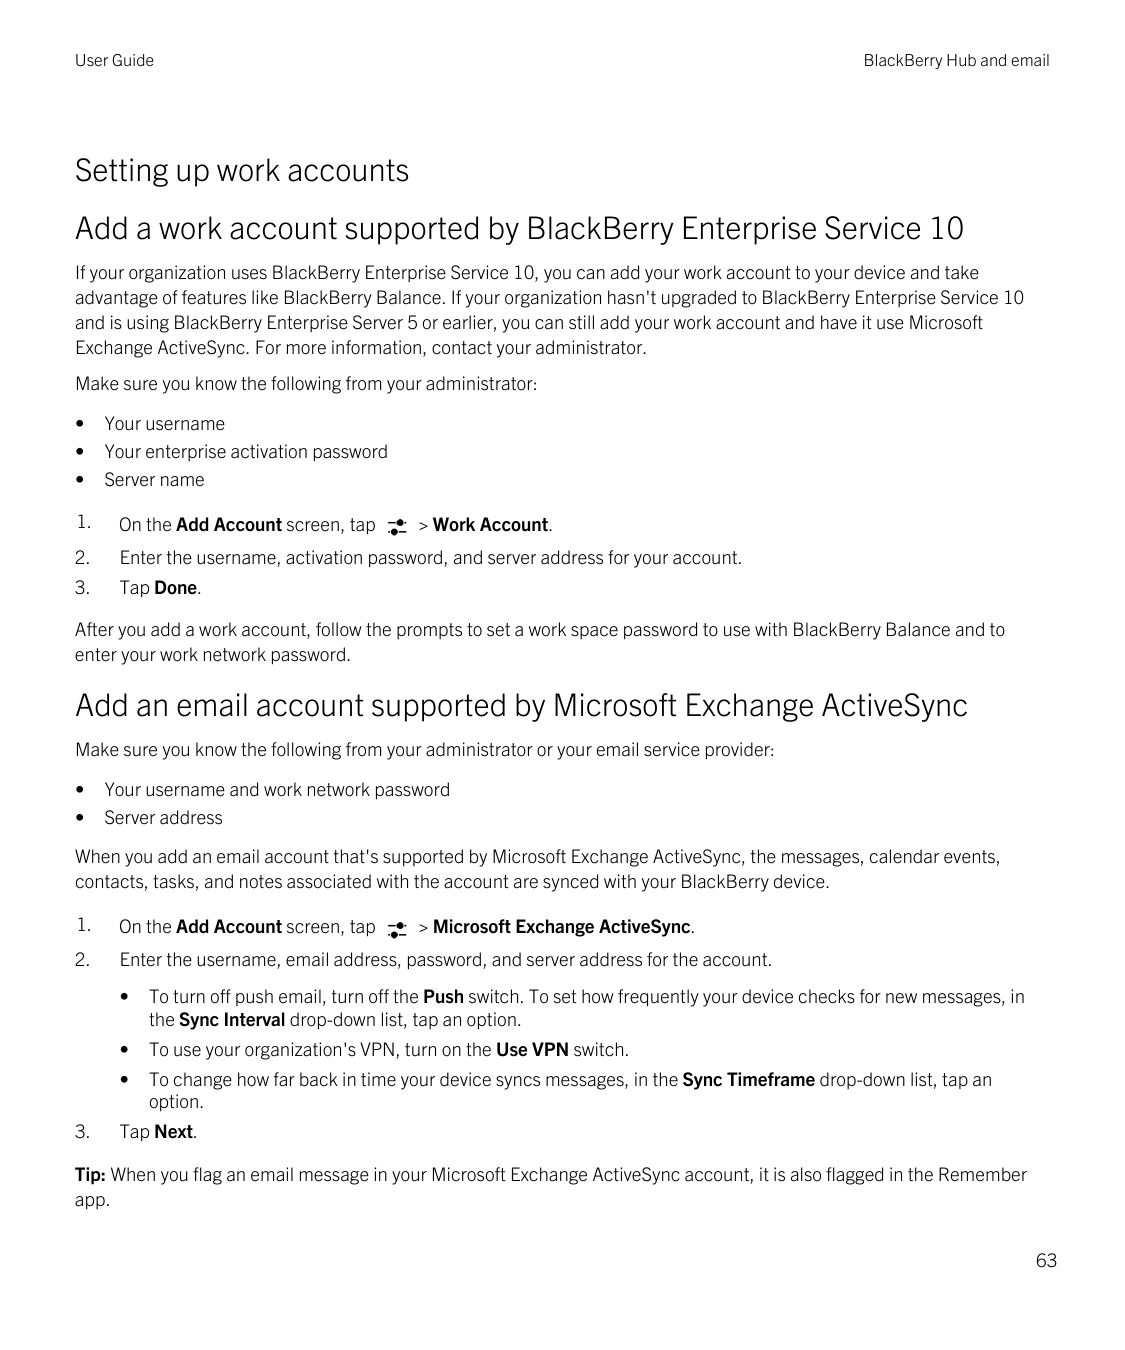 User GuideBlackBerry Hub and emailSetting up work accountsAdd a work account supported by BlackBerry Enterprise Service 10If you